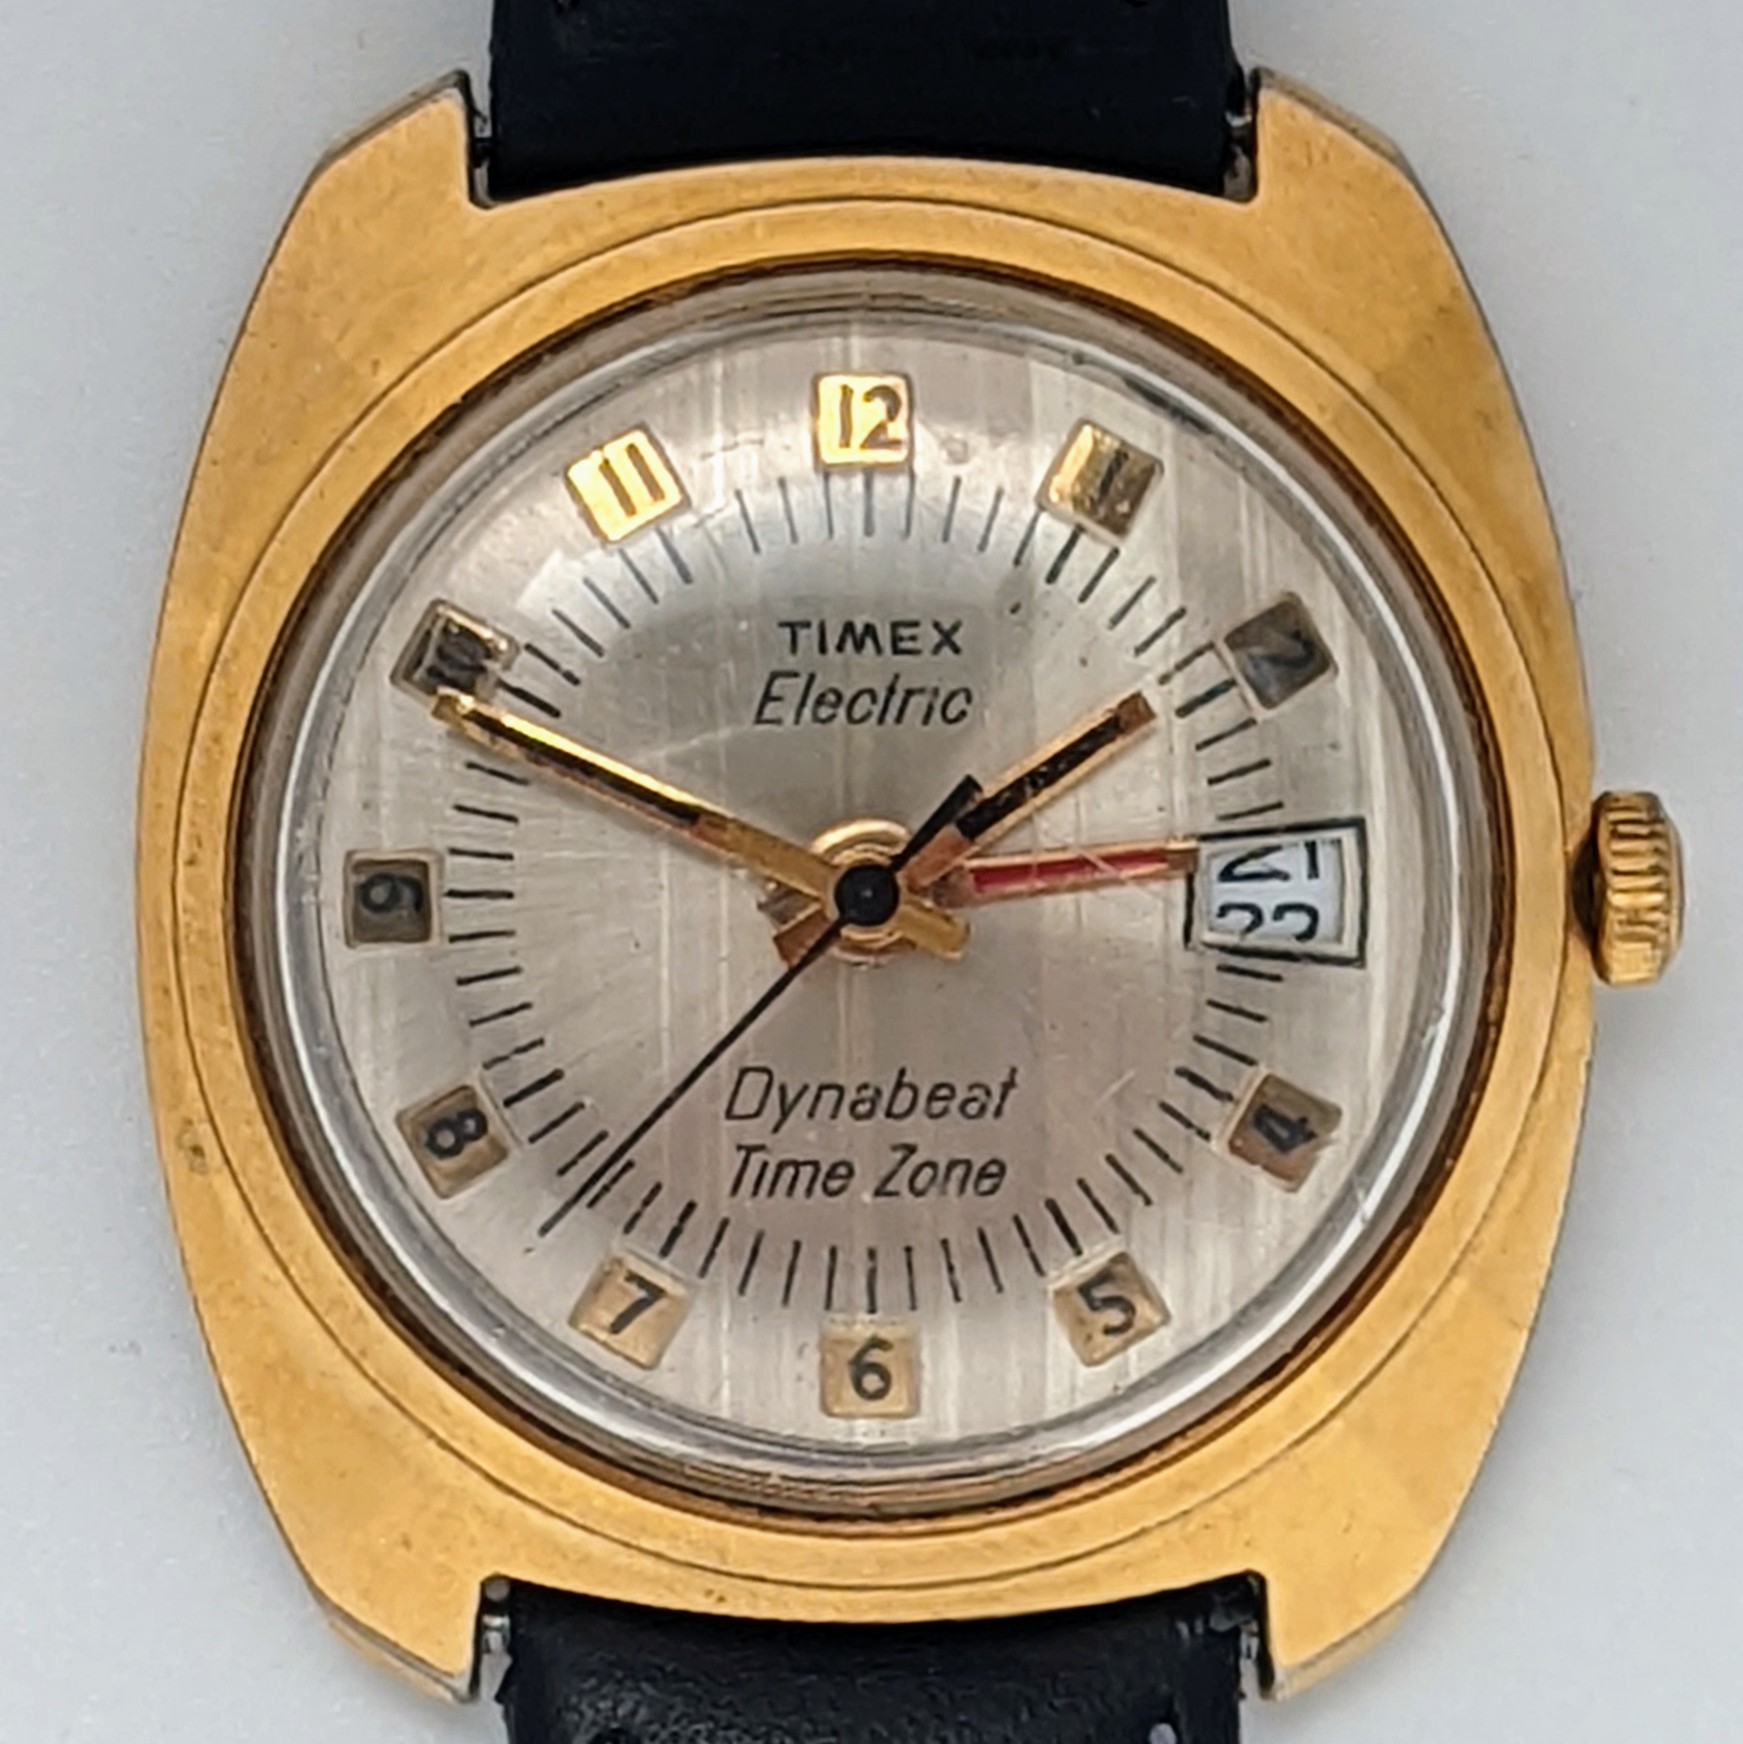 Timex Electric Dynabeat 79760-26575 [1975] Time-Zone